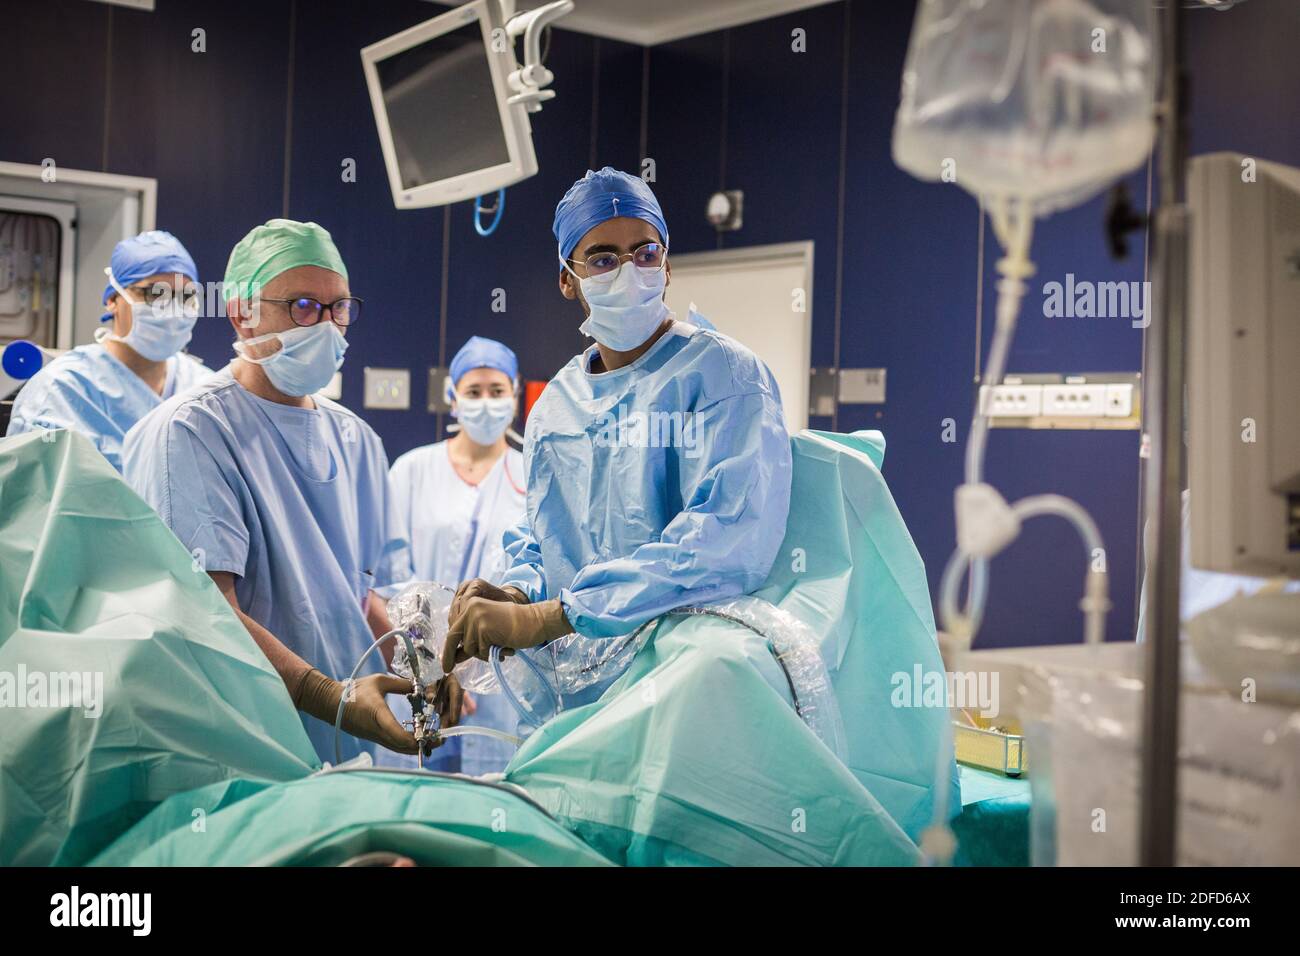 Medical students (external) in the operating room observing a professor and an intern during an operation (Urethrotomy) under endoscopy, Department of Stock Photo